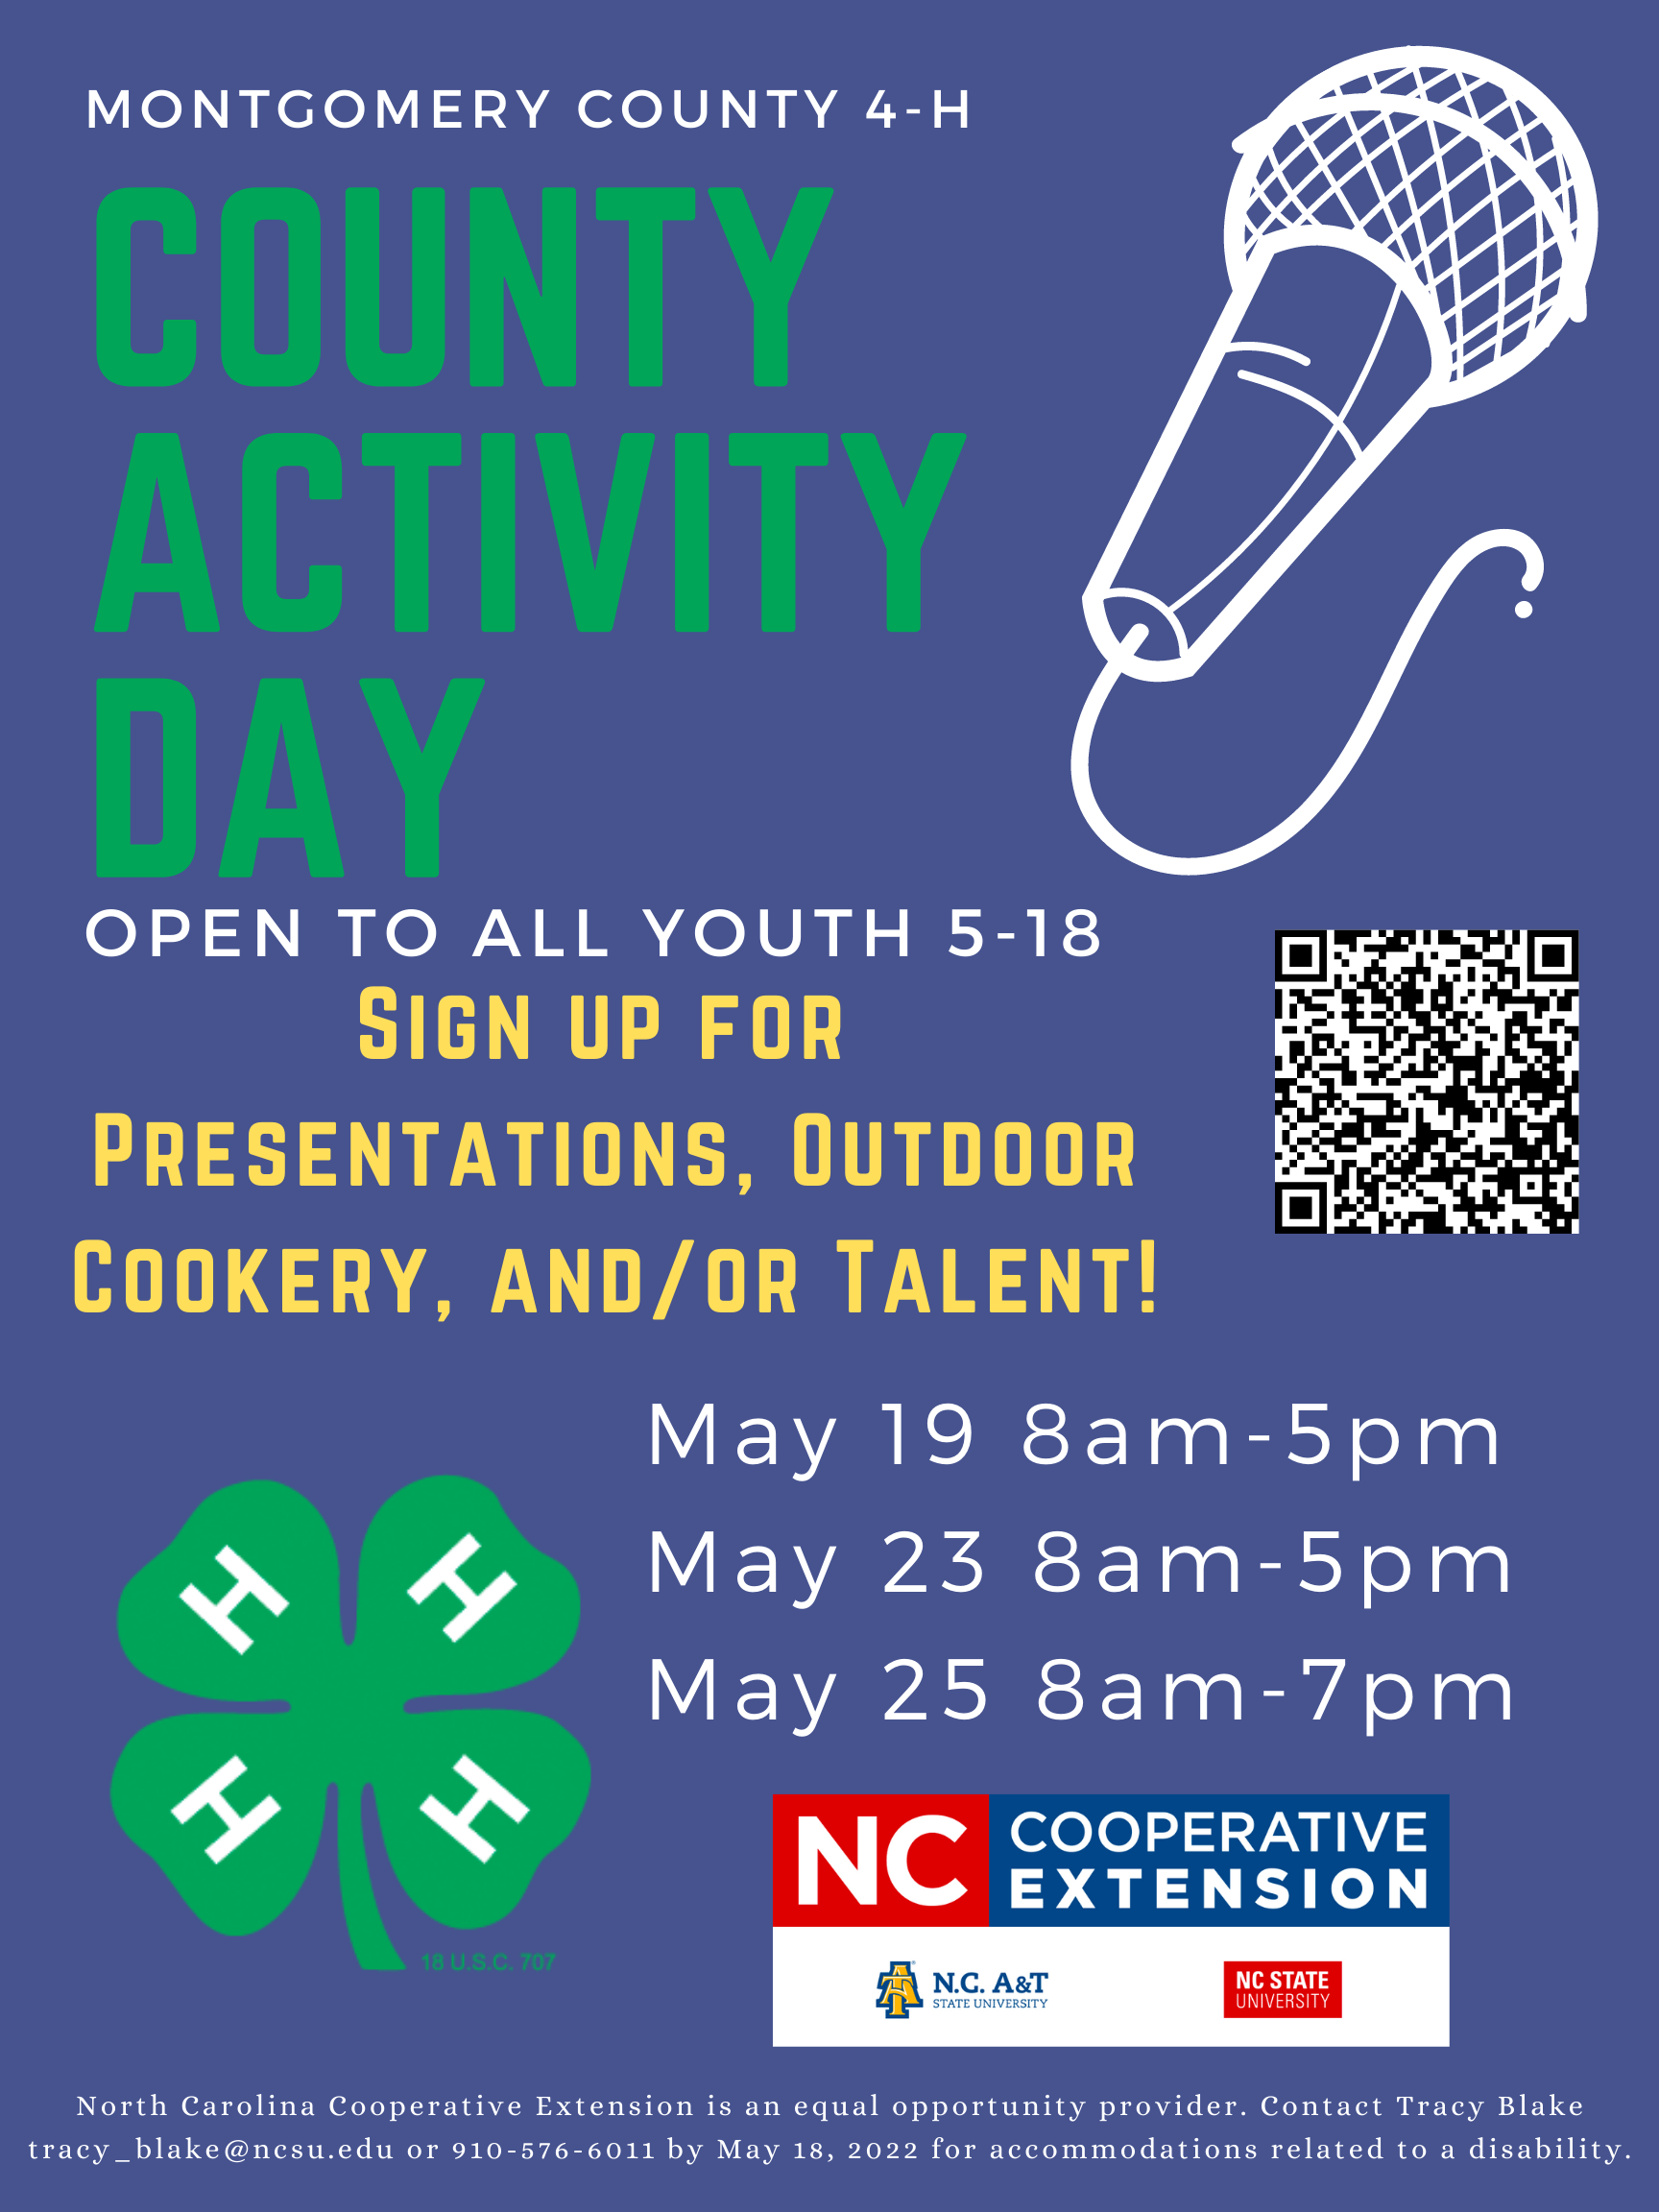 County Activity Day, open to all youth 5-18. Sign up for presentations, outdoor cookery and/or talent! May 19, May 23, May 25.